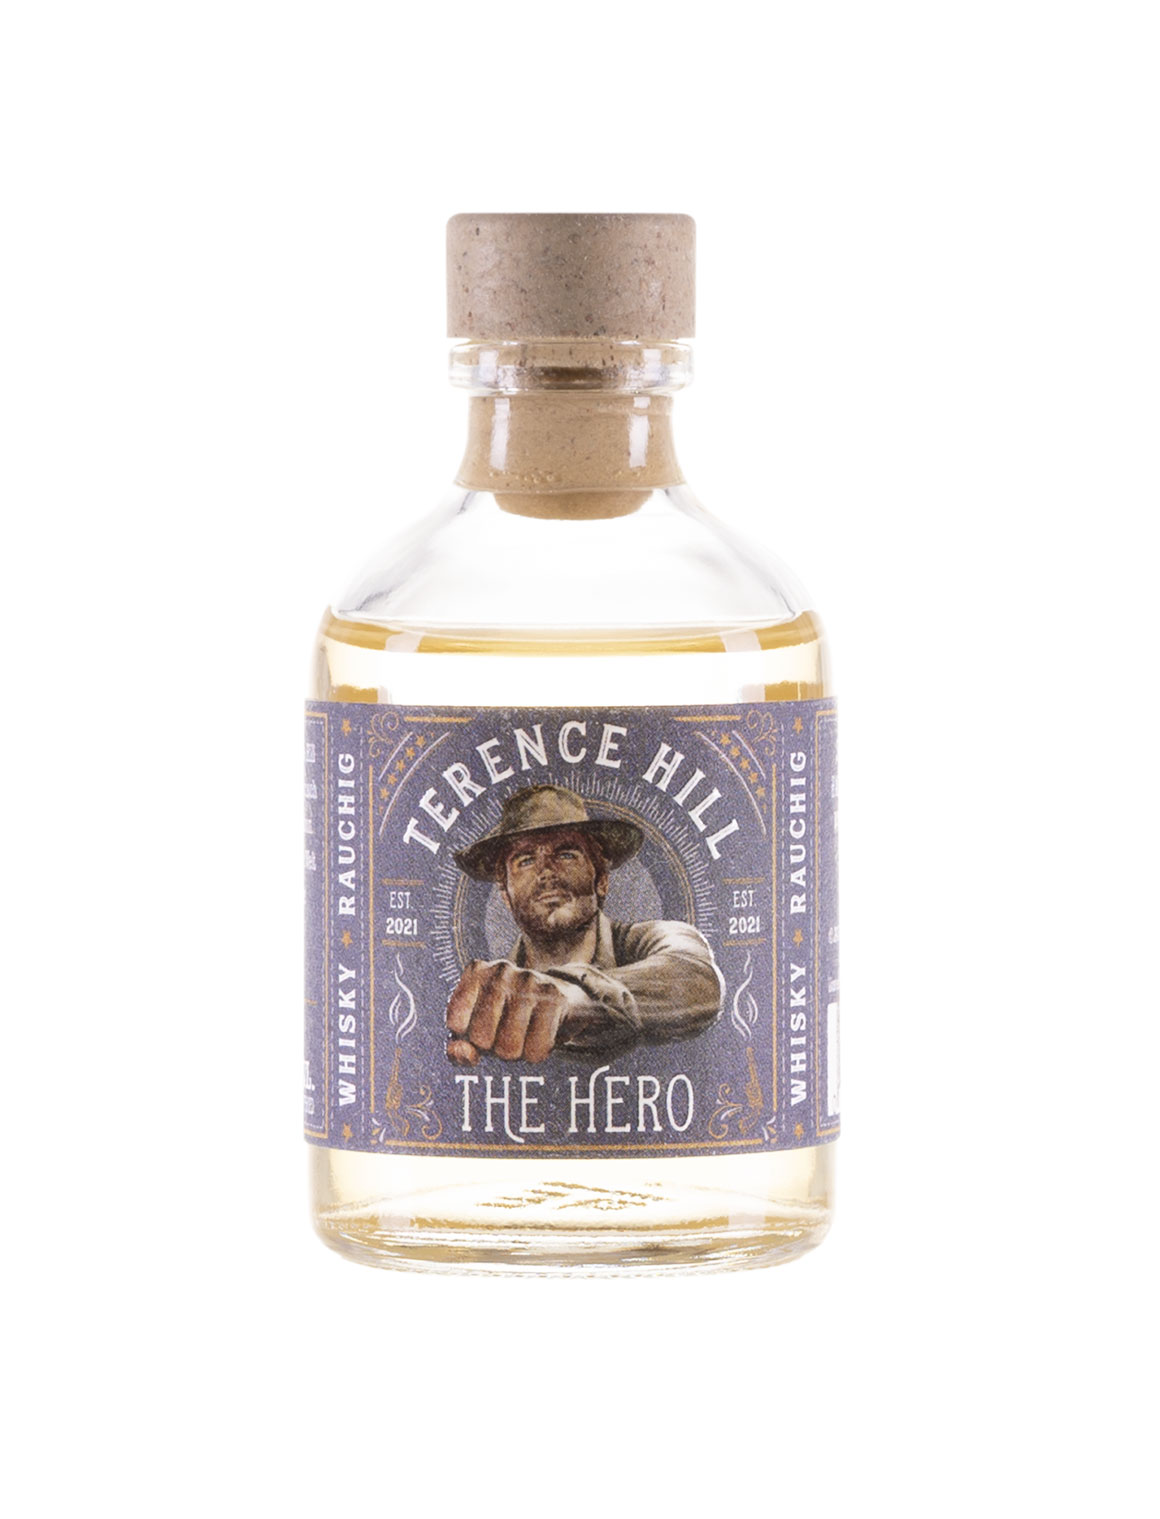 Terence Hill The Hero Whisky Torbato